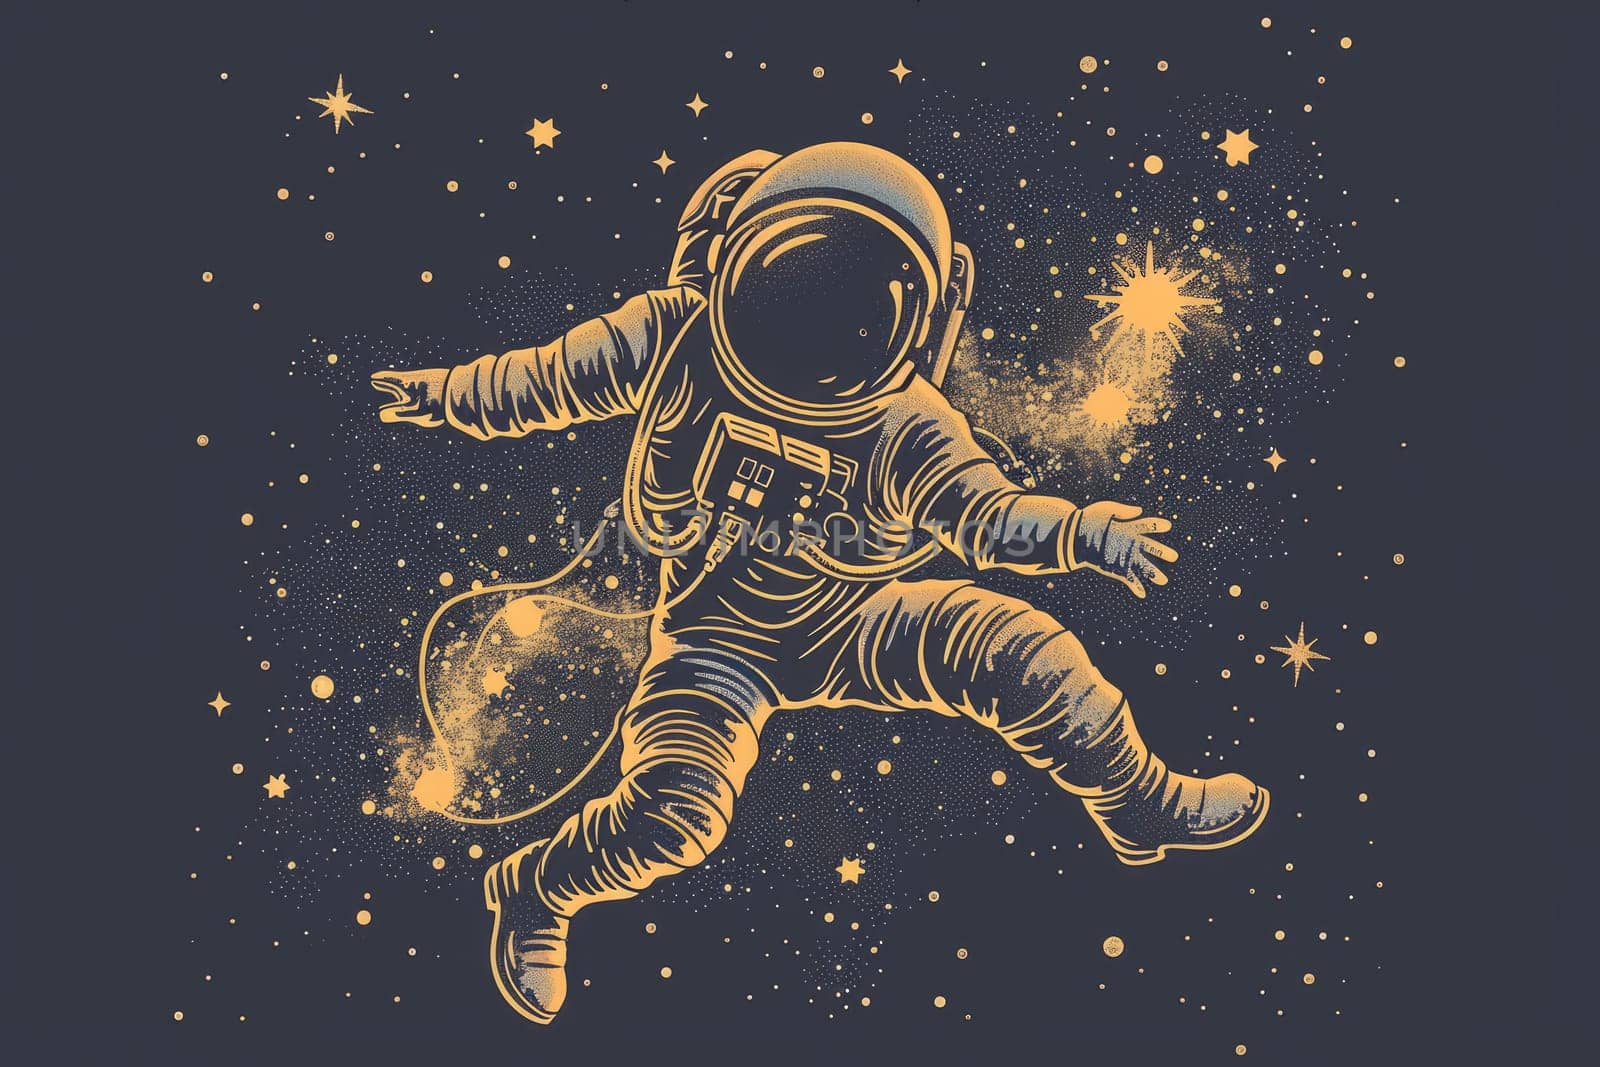 Astronaut Floating in Space with Stars and Planets by ailike